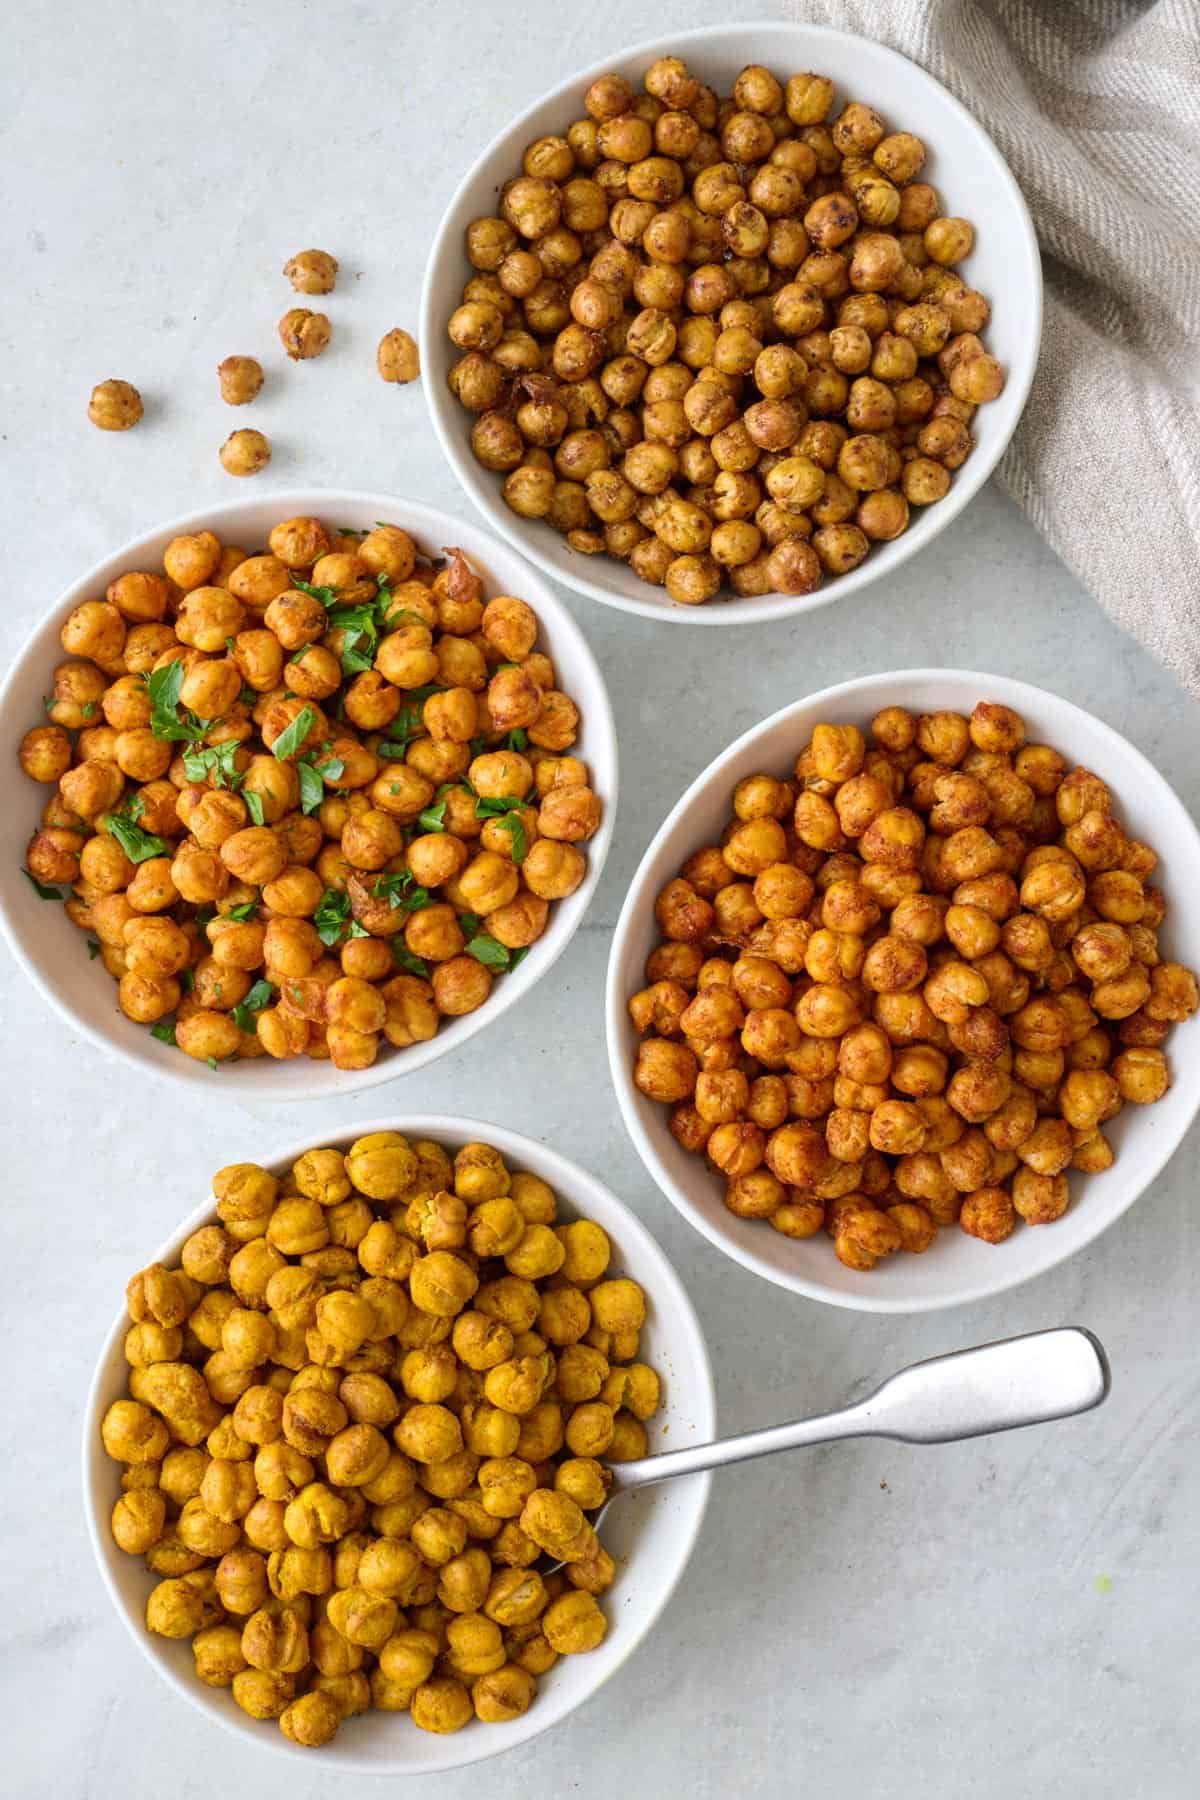 Crunchy snack alternative - garbanzo beans roasted in the oven